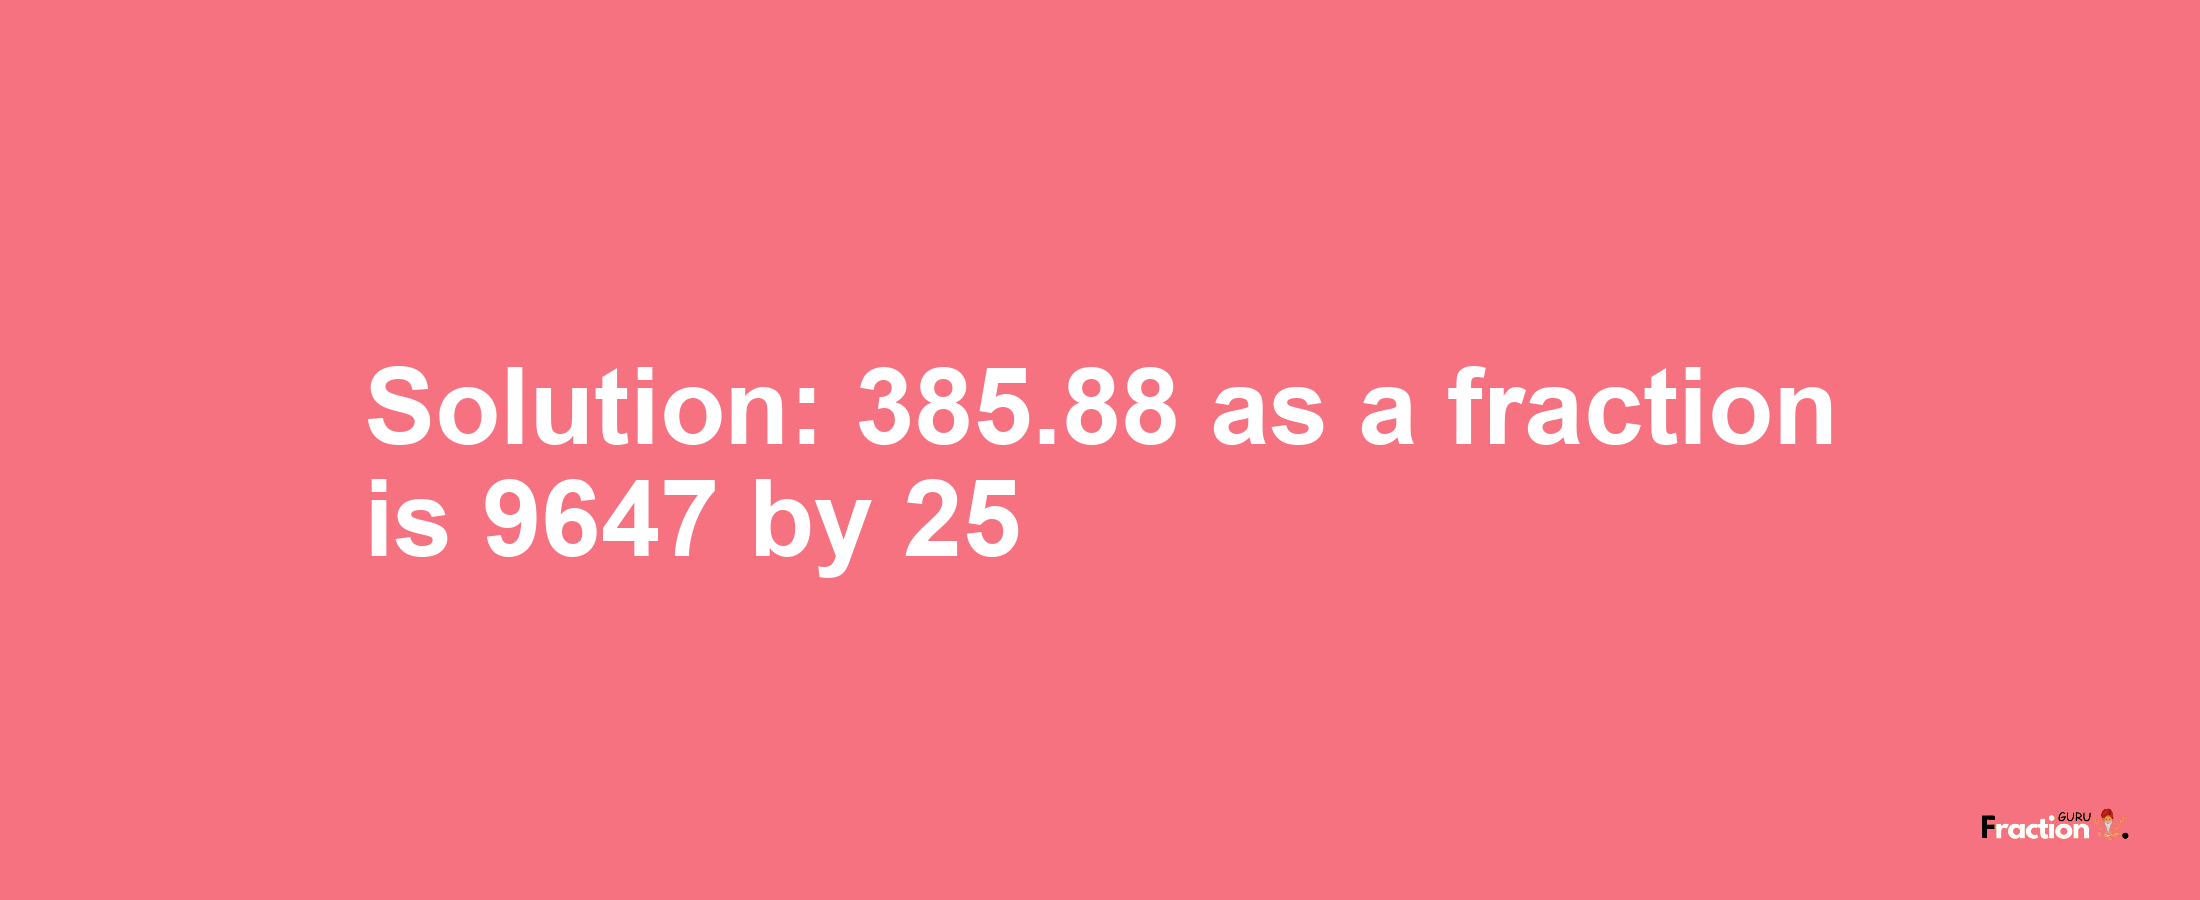 Solution:385.88 as a fraction is 9647/25